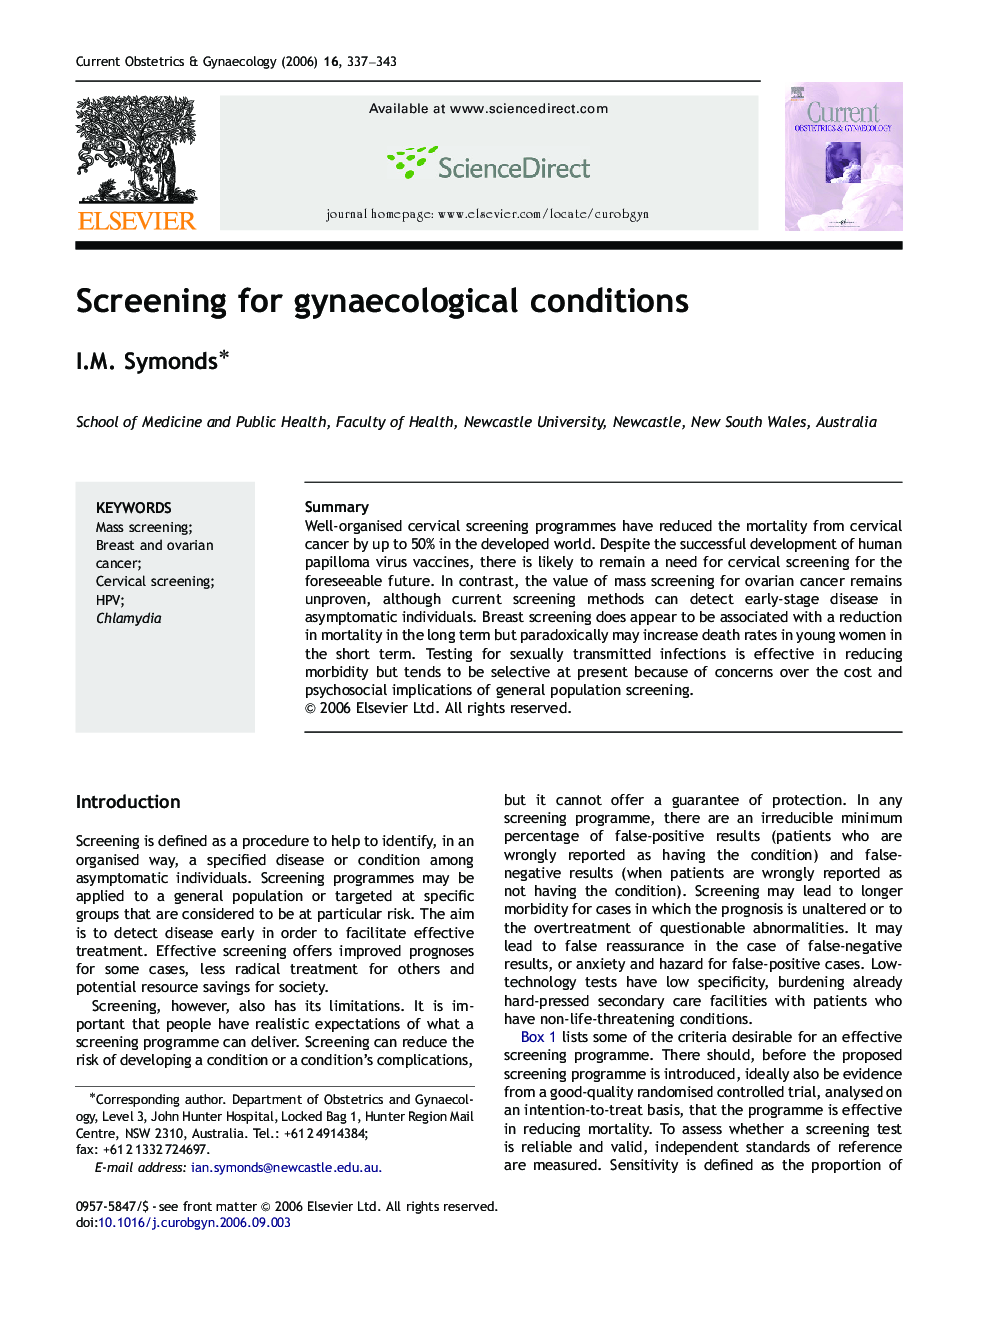 Screening for gynaecological conditions